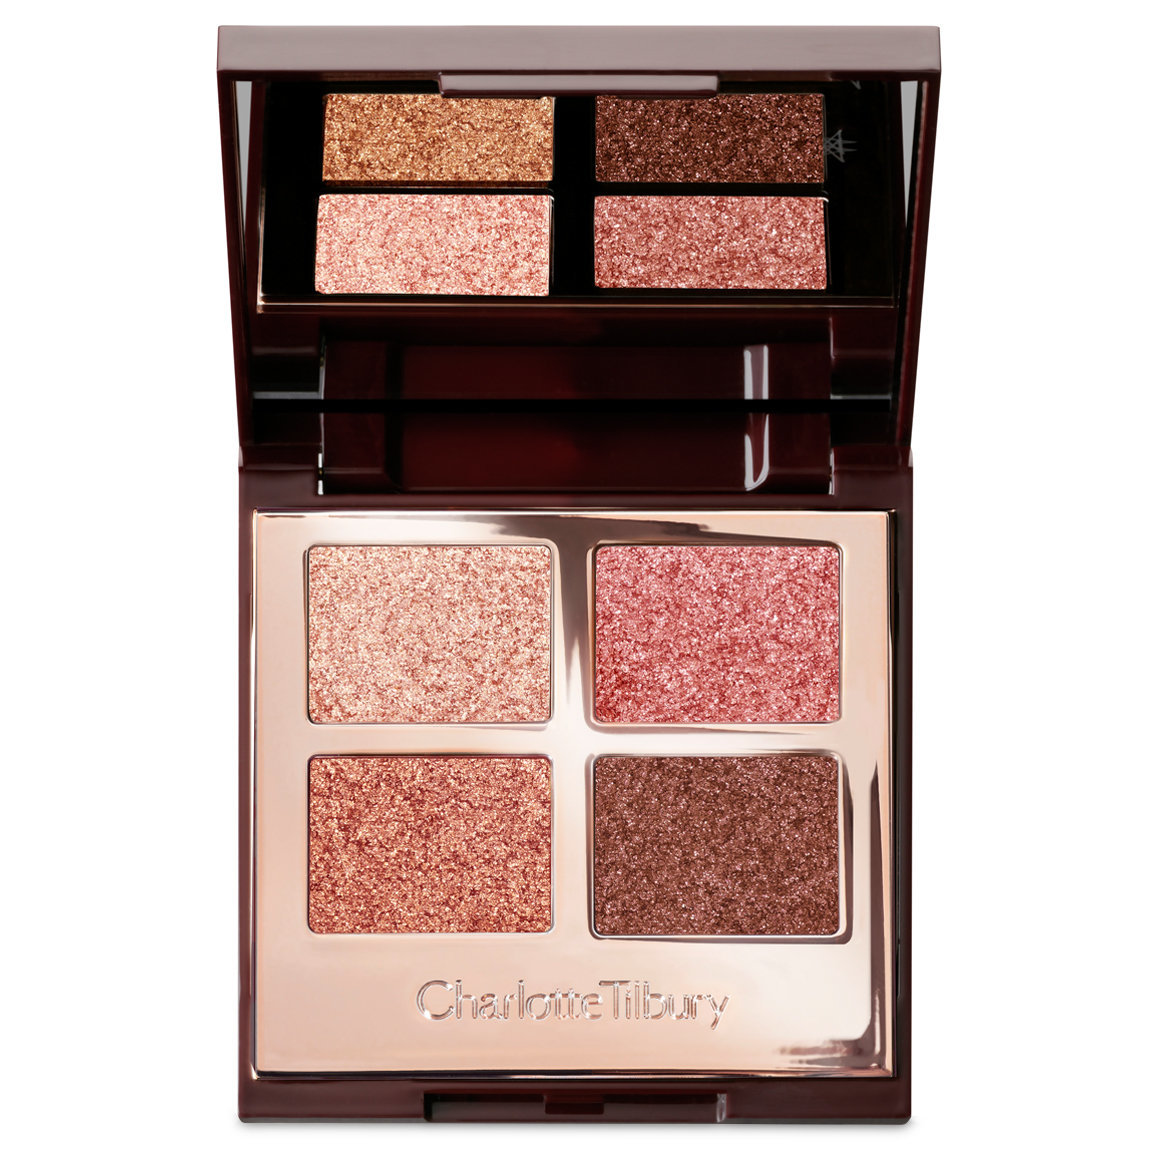 Charlotte Tilbury Luxury Palette of Pops Pillow Talk alternative view 1 - product swatch.